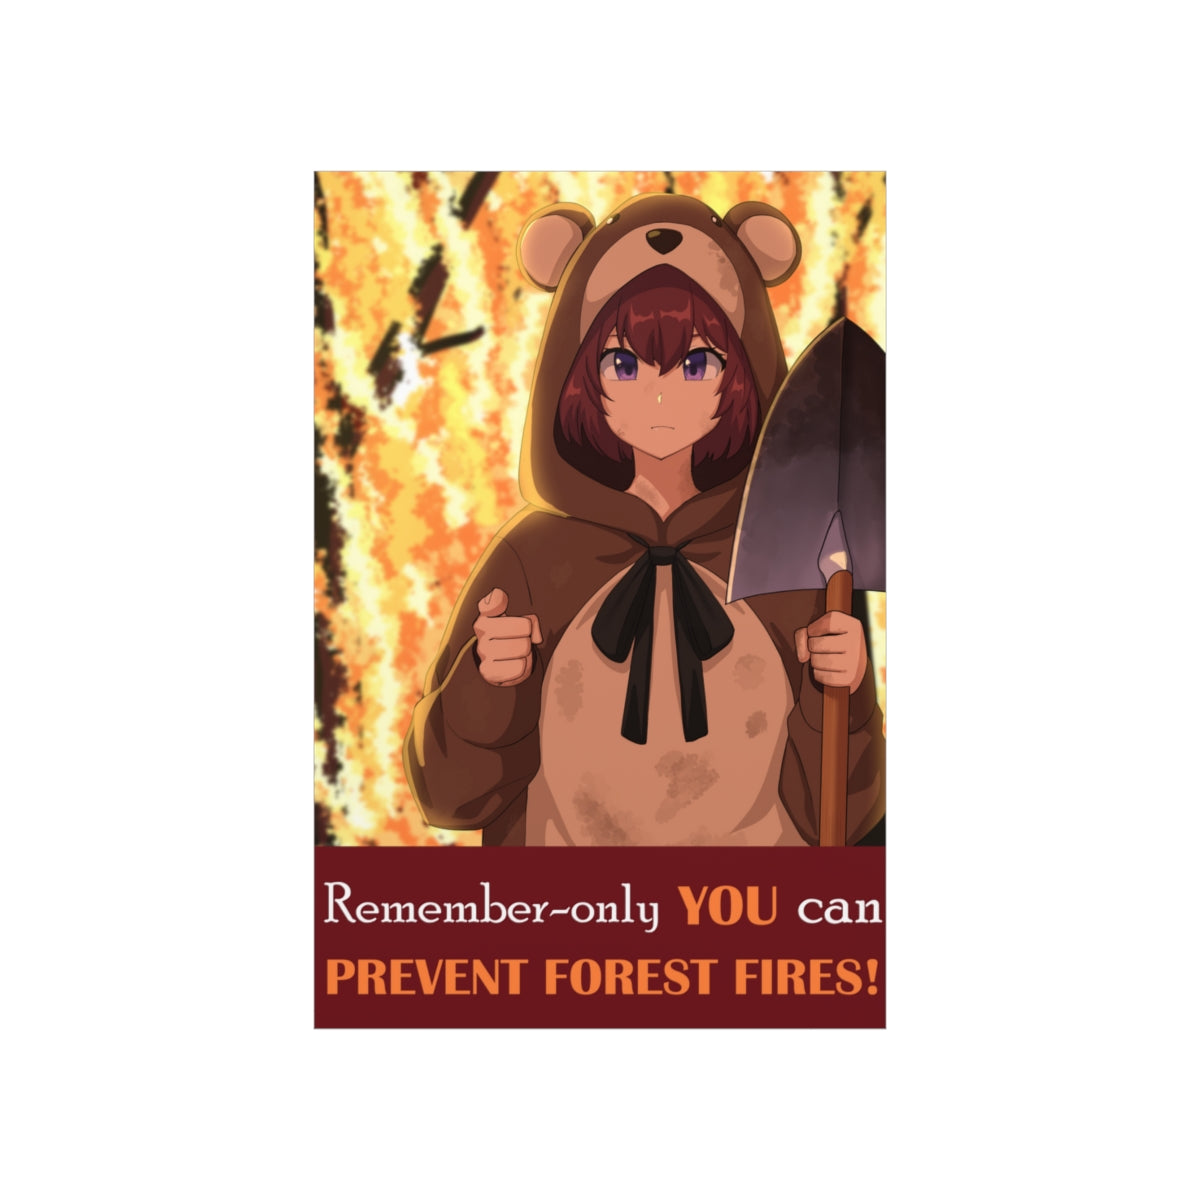 Prevent Fires Poster